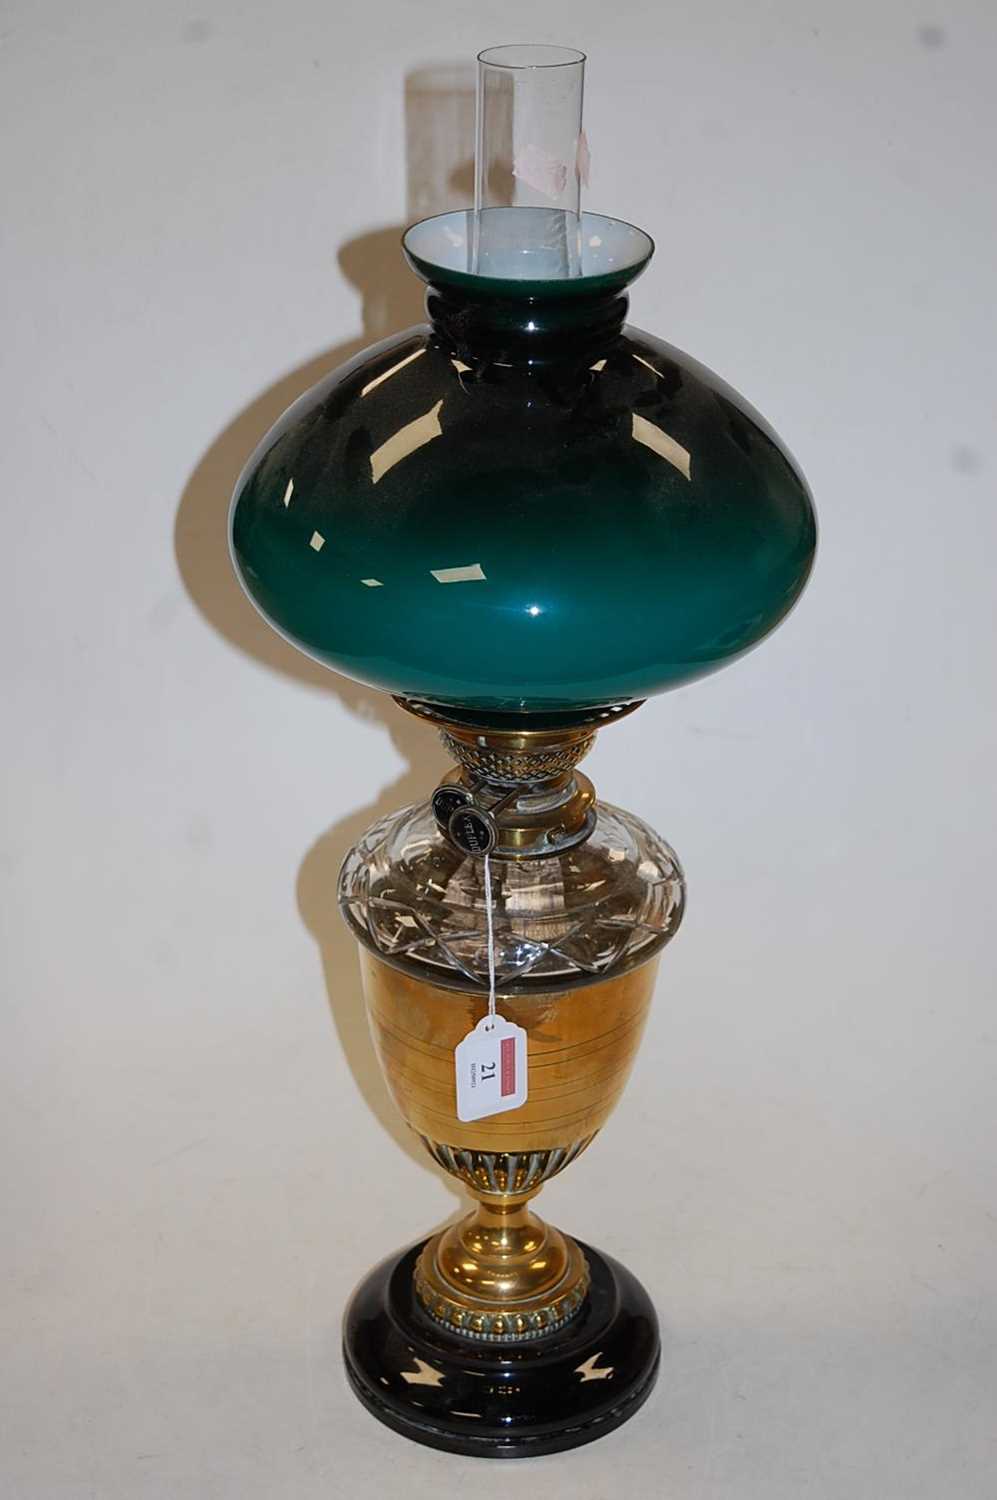 An early 20th century oil lamp, having a green opalescent glass shade, duplex burner and clear glass - Image 2 of 2